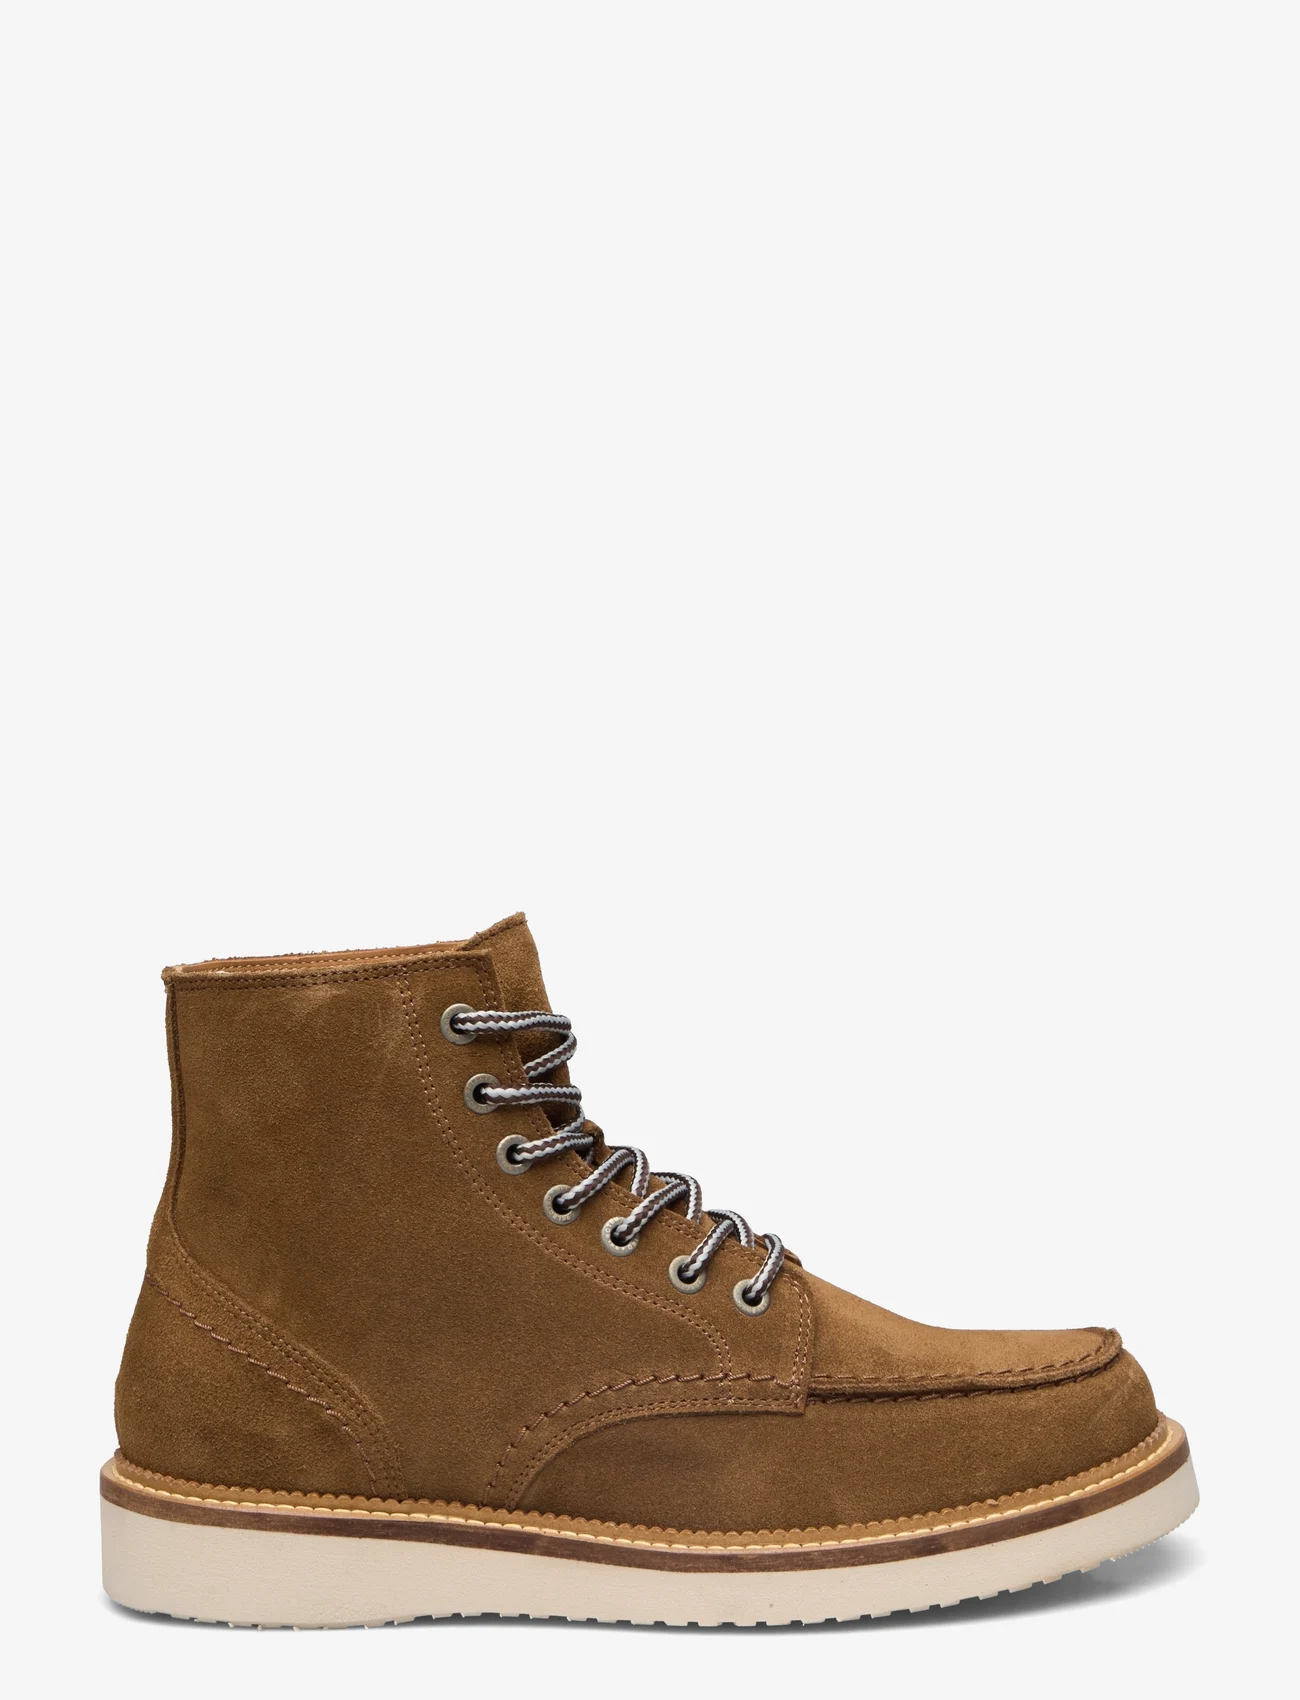 Selected Homme - SLHTEO NEW SUEDE MOC-TOE BOOT B - paeltega jalanõud - tobacco brown - 1